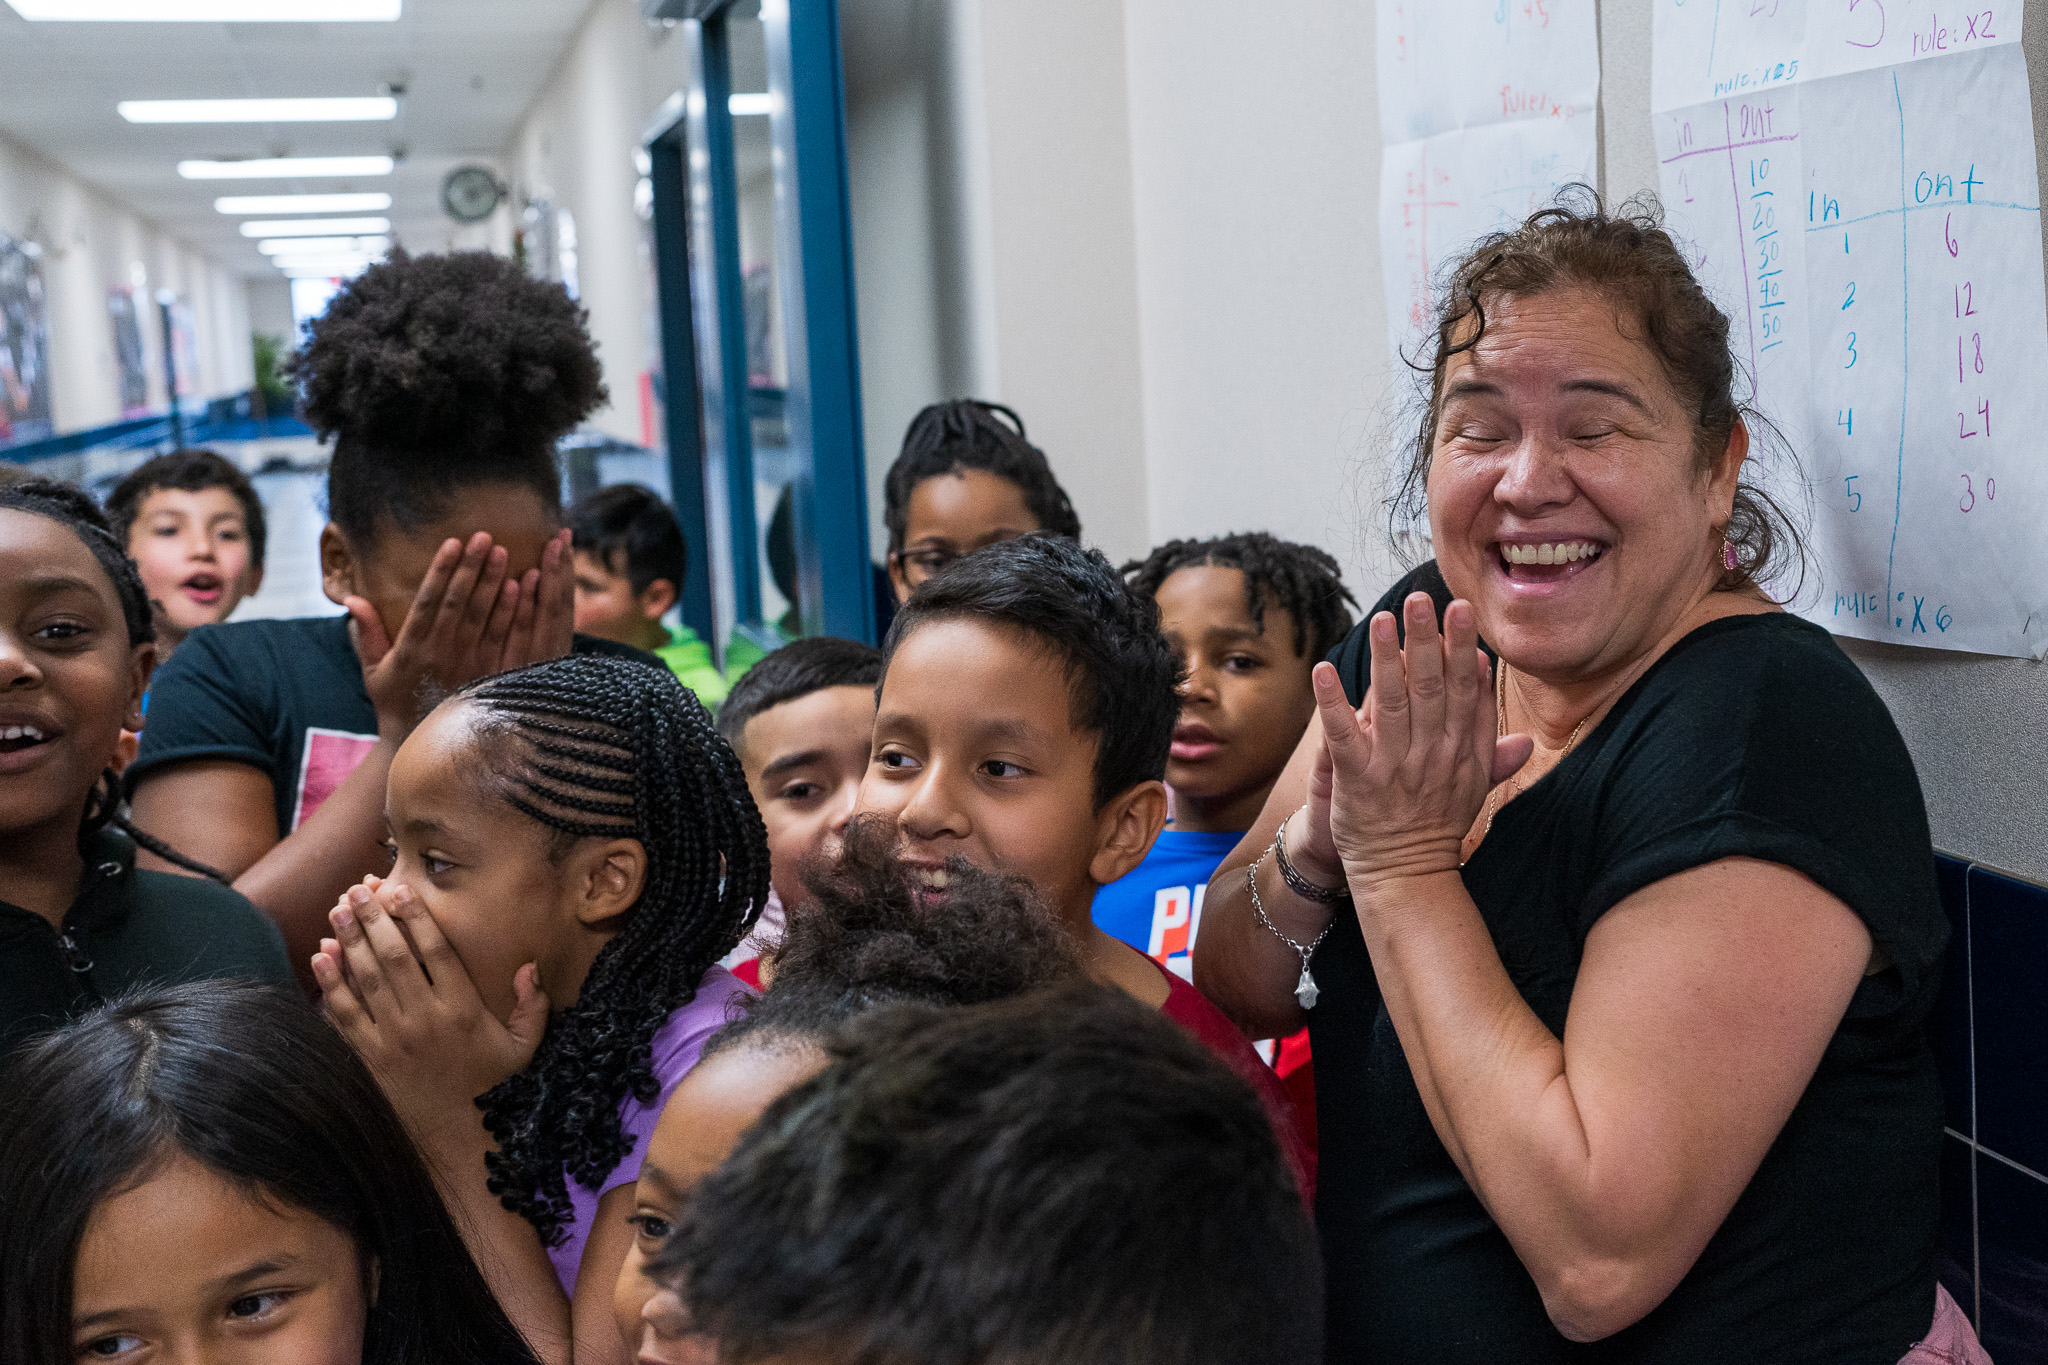 woman with excited expression on face with students around her